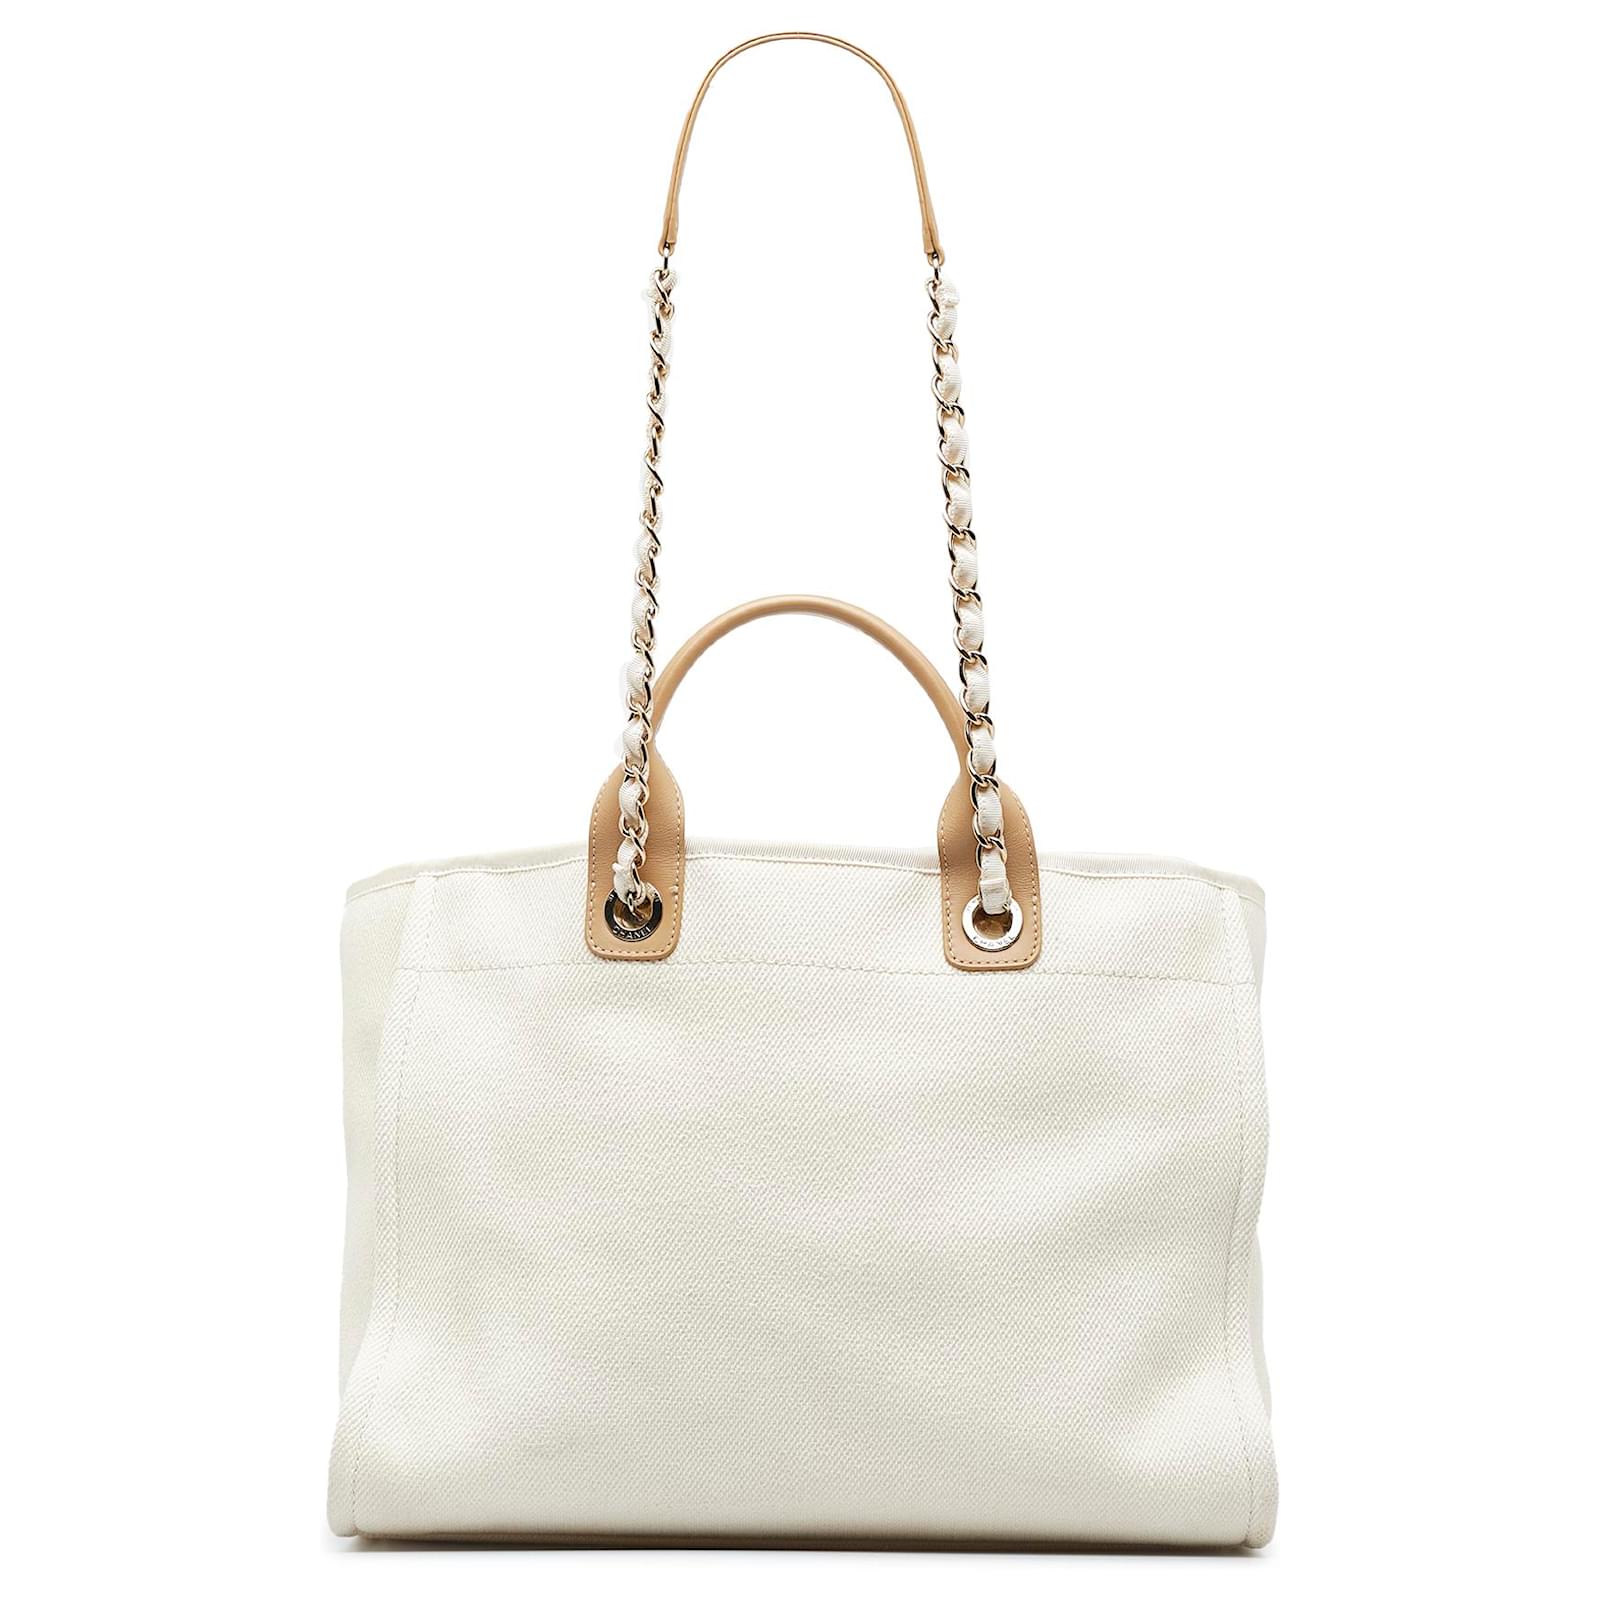 Chanel White Medium Pearls Deauville Shopping Tote